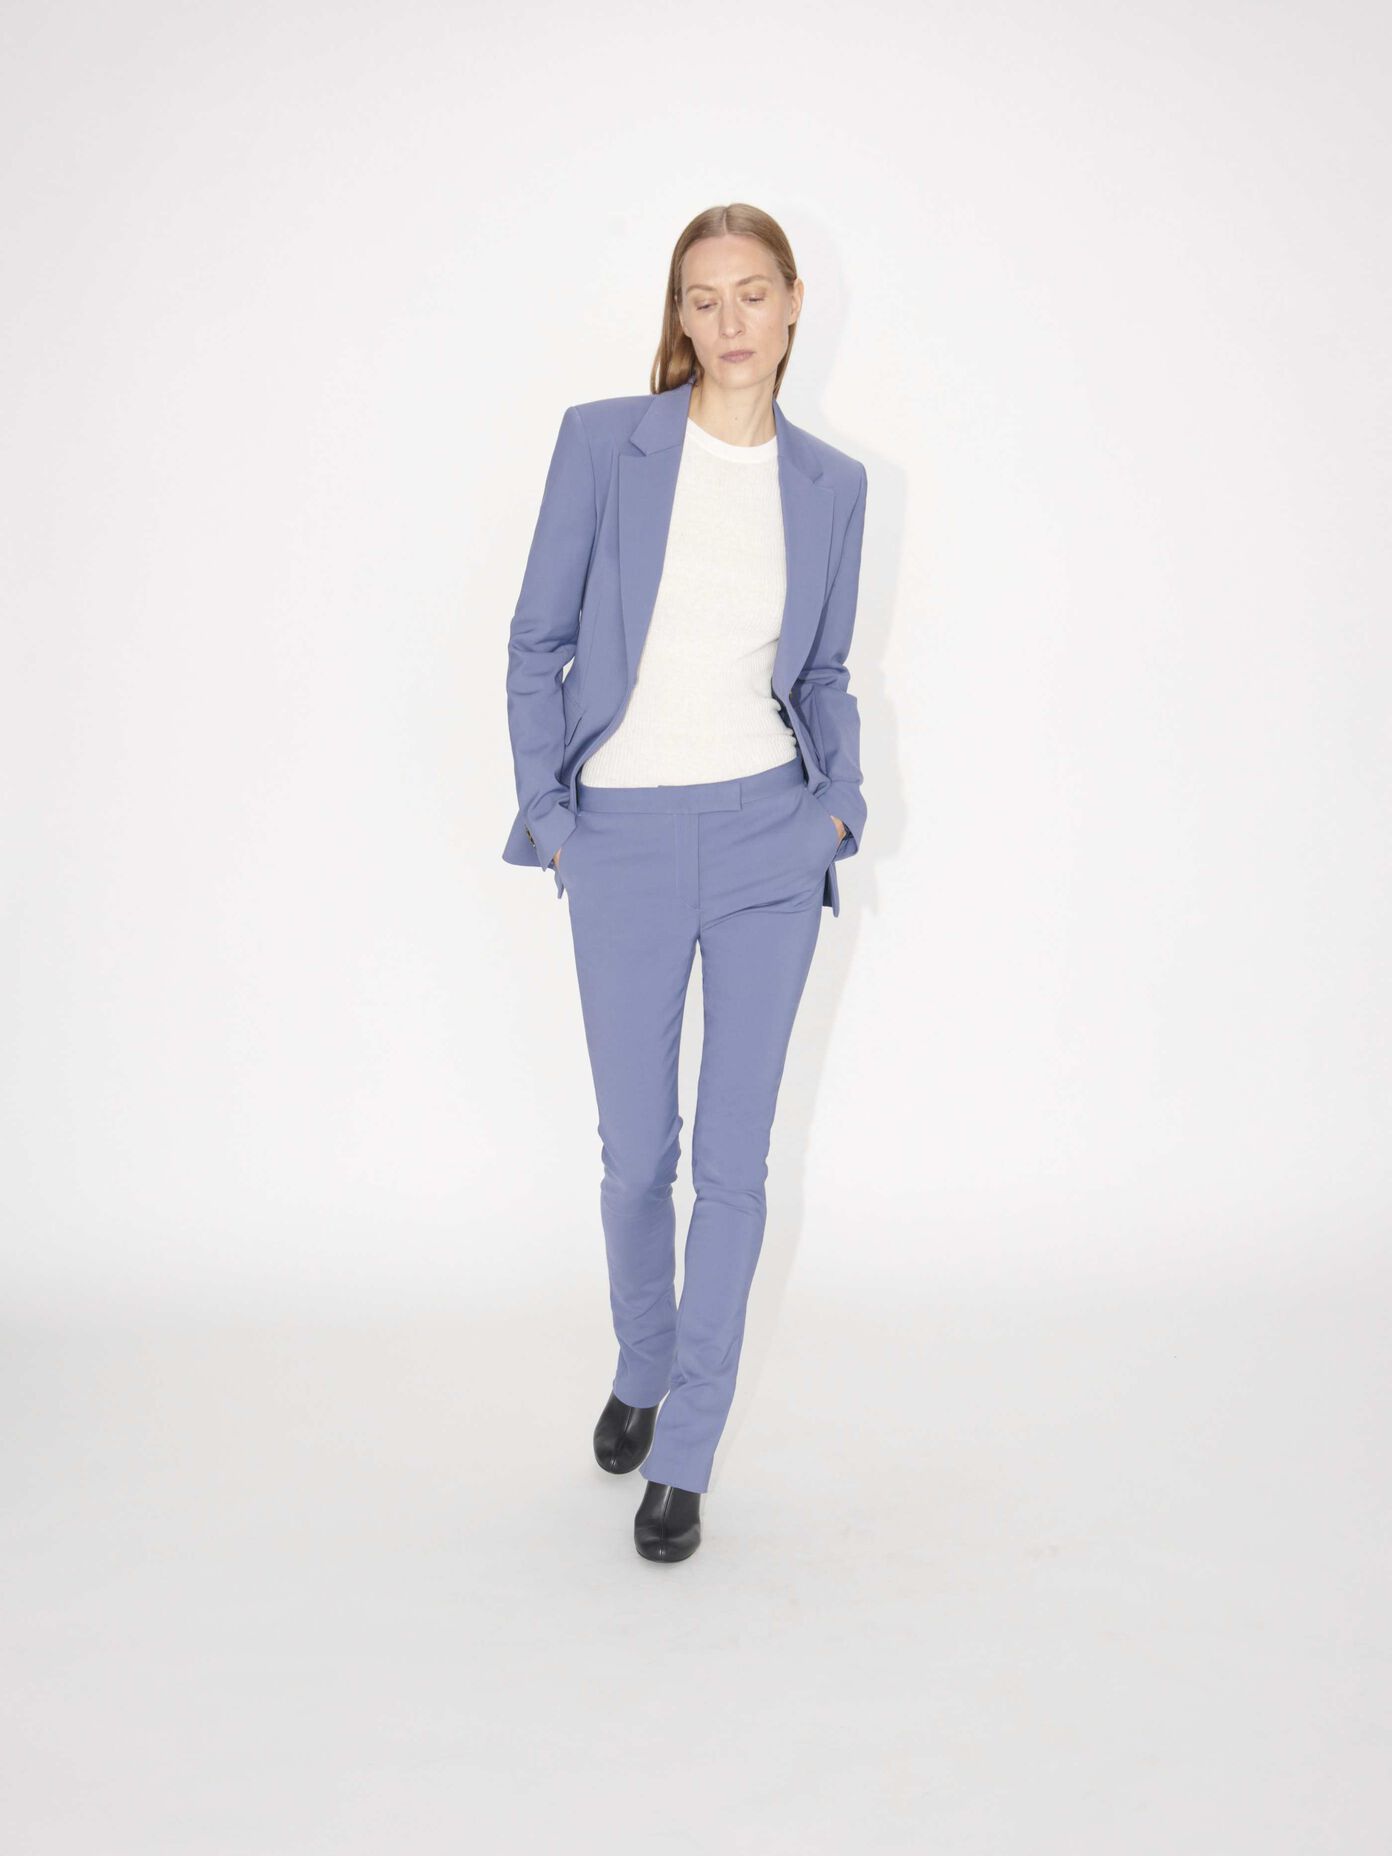 Sale Women - Shop Tiger of Sweden women's clothing and accessories online